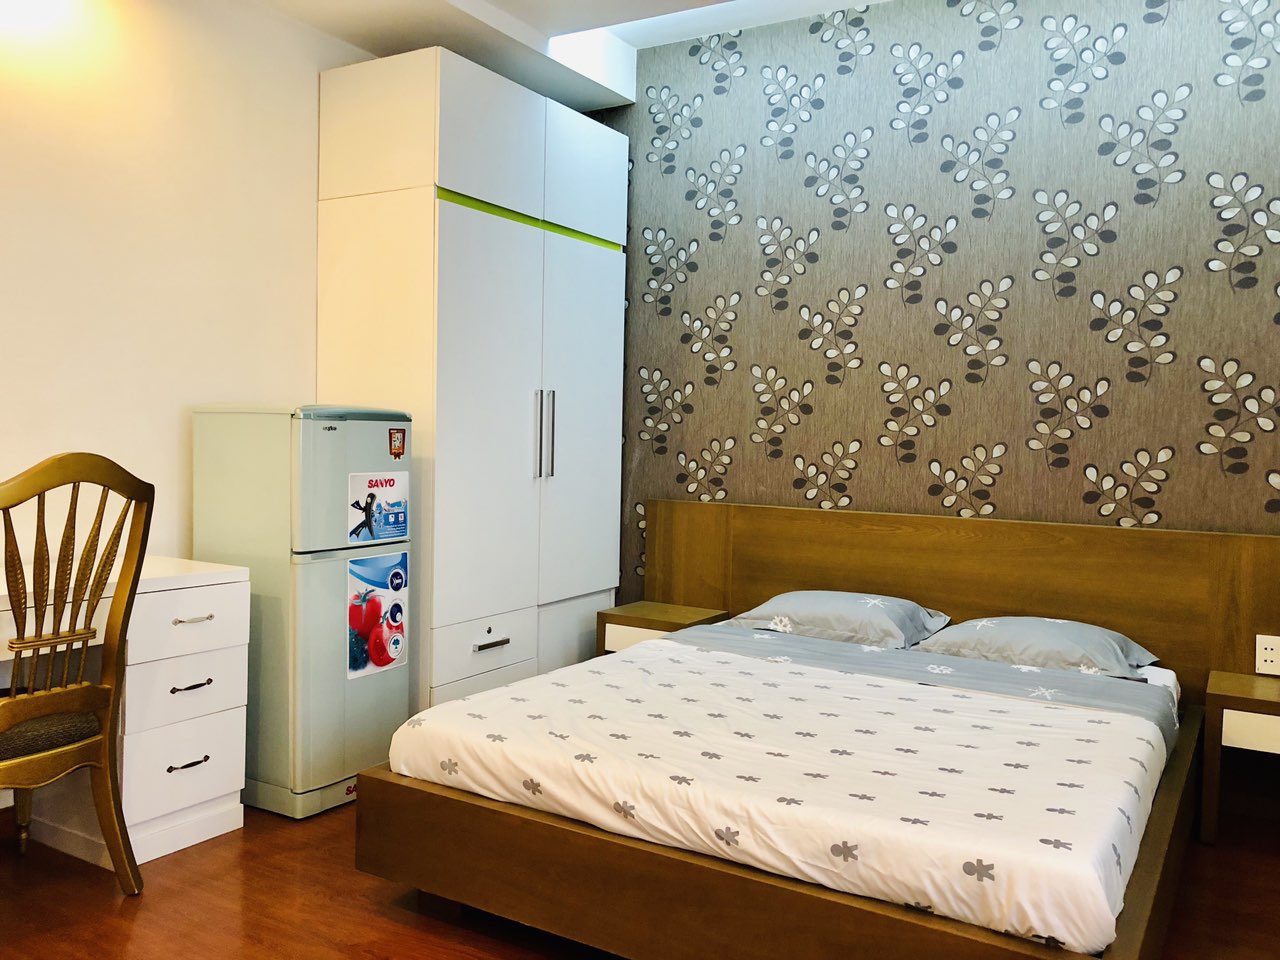 Serviced-apartment-on-Nguyen-Dinh-Chieu-street-in-district-1-ID-288-studio-with-window-part-3